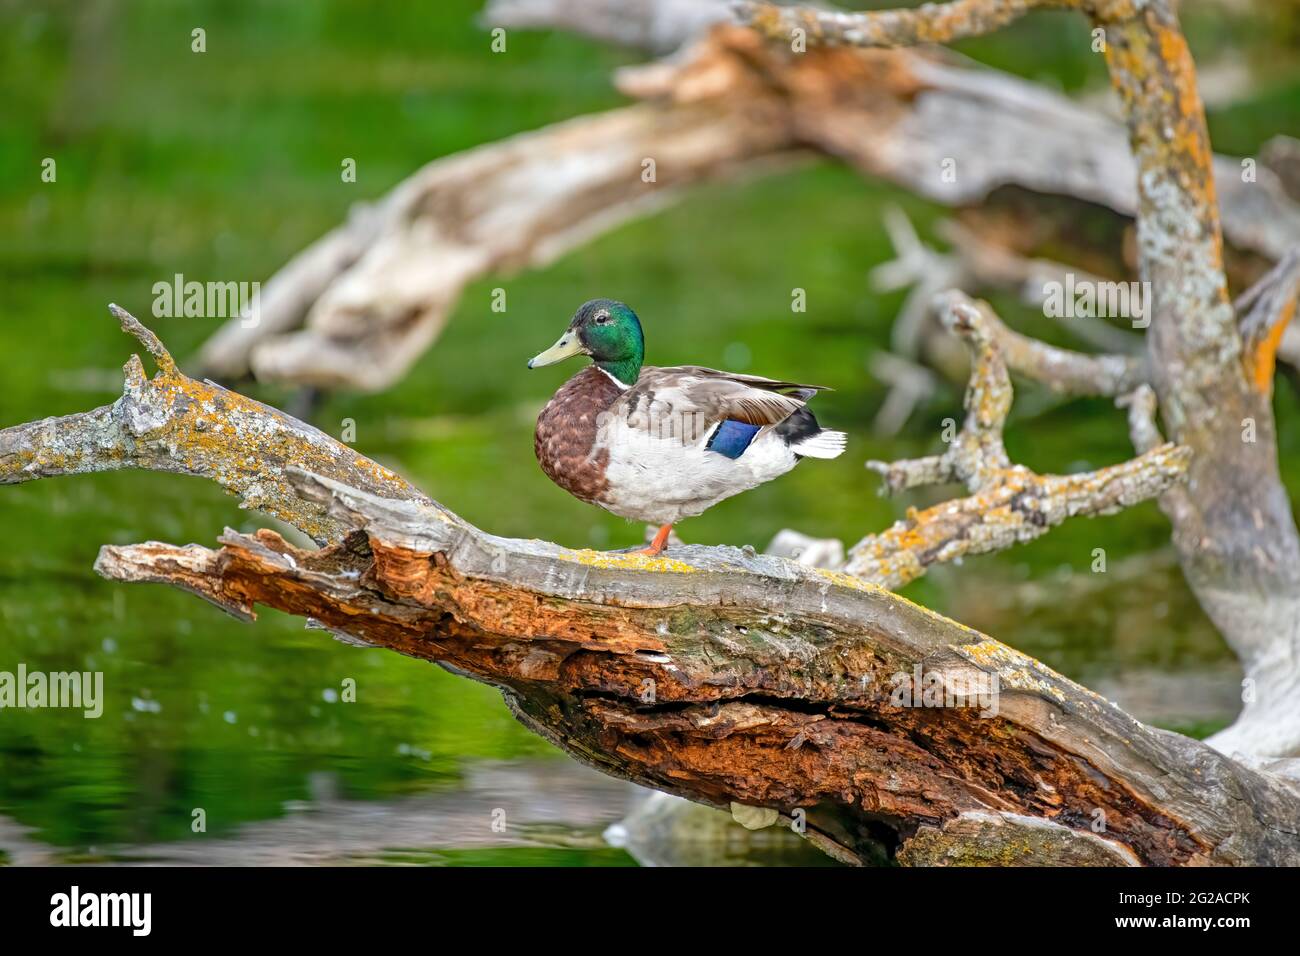 Male mallard duck balancing on a weathered log in a pond with a green background Stock Photo